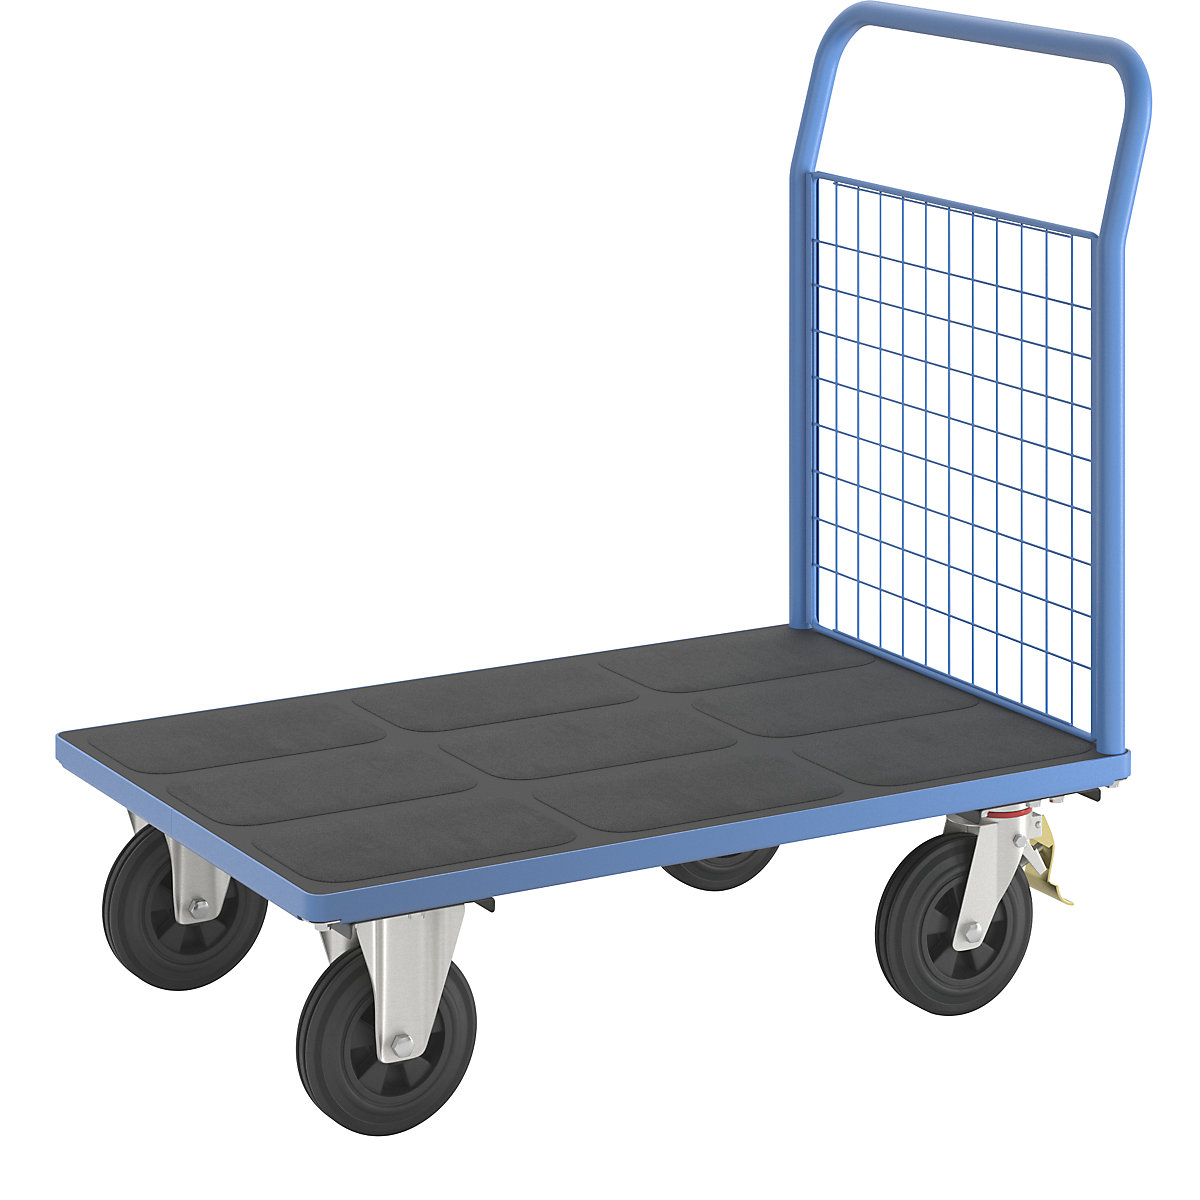 Platform truck – eurokraft pro, with mesh front panel, LxW 1050 x 700 mm, solid rubber tyres-10